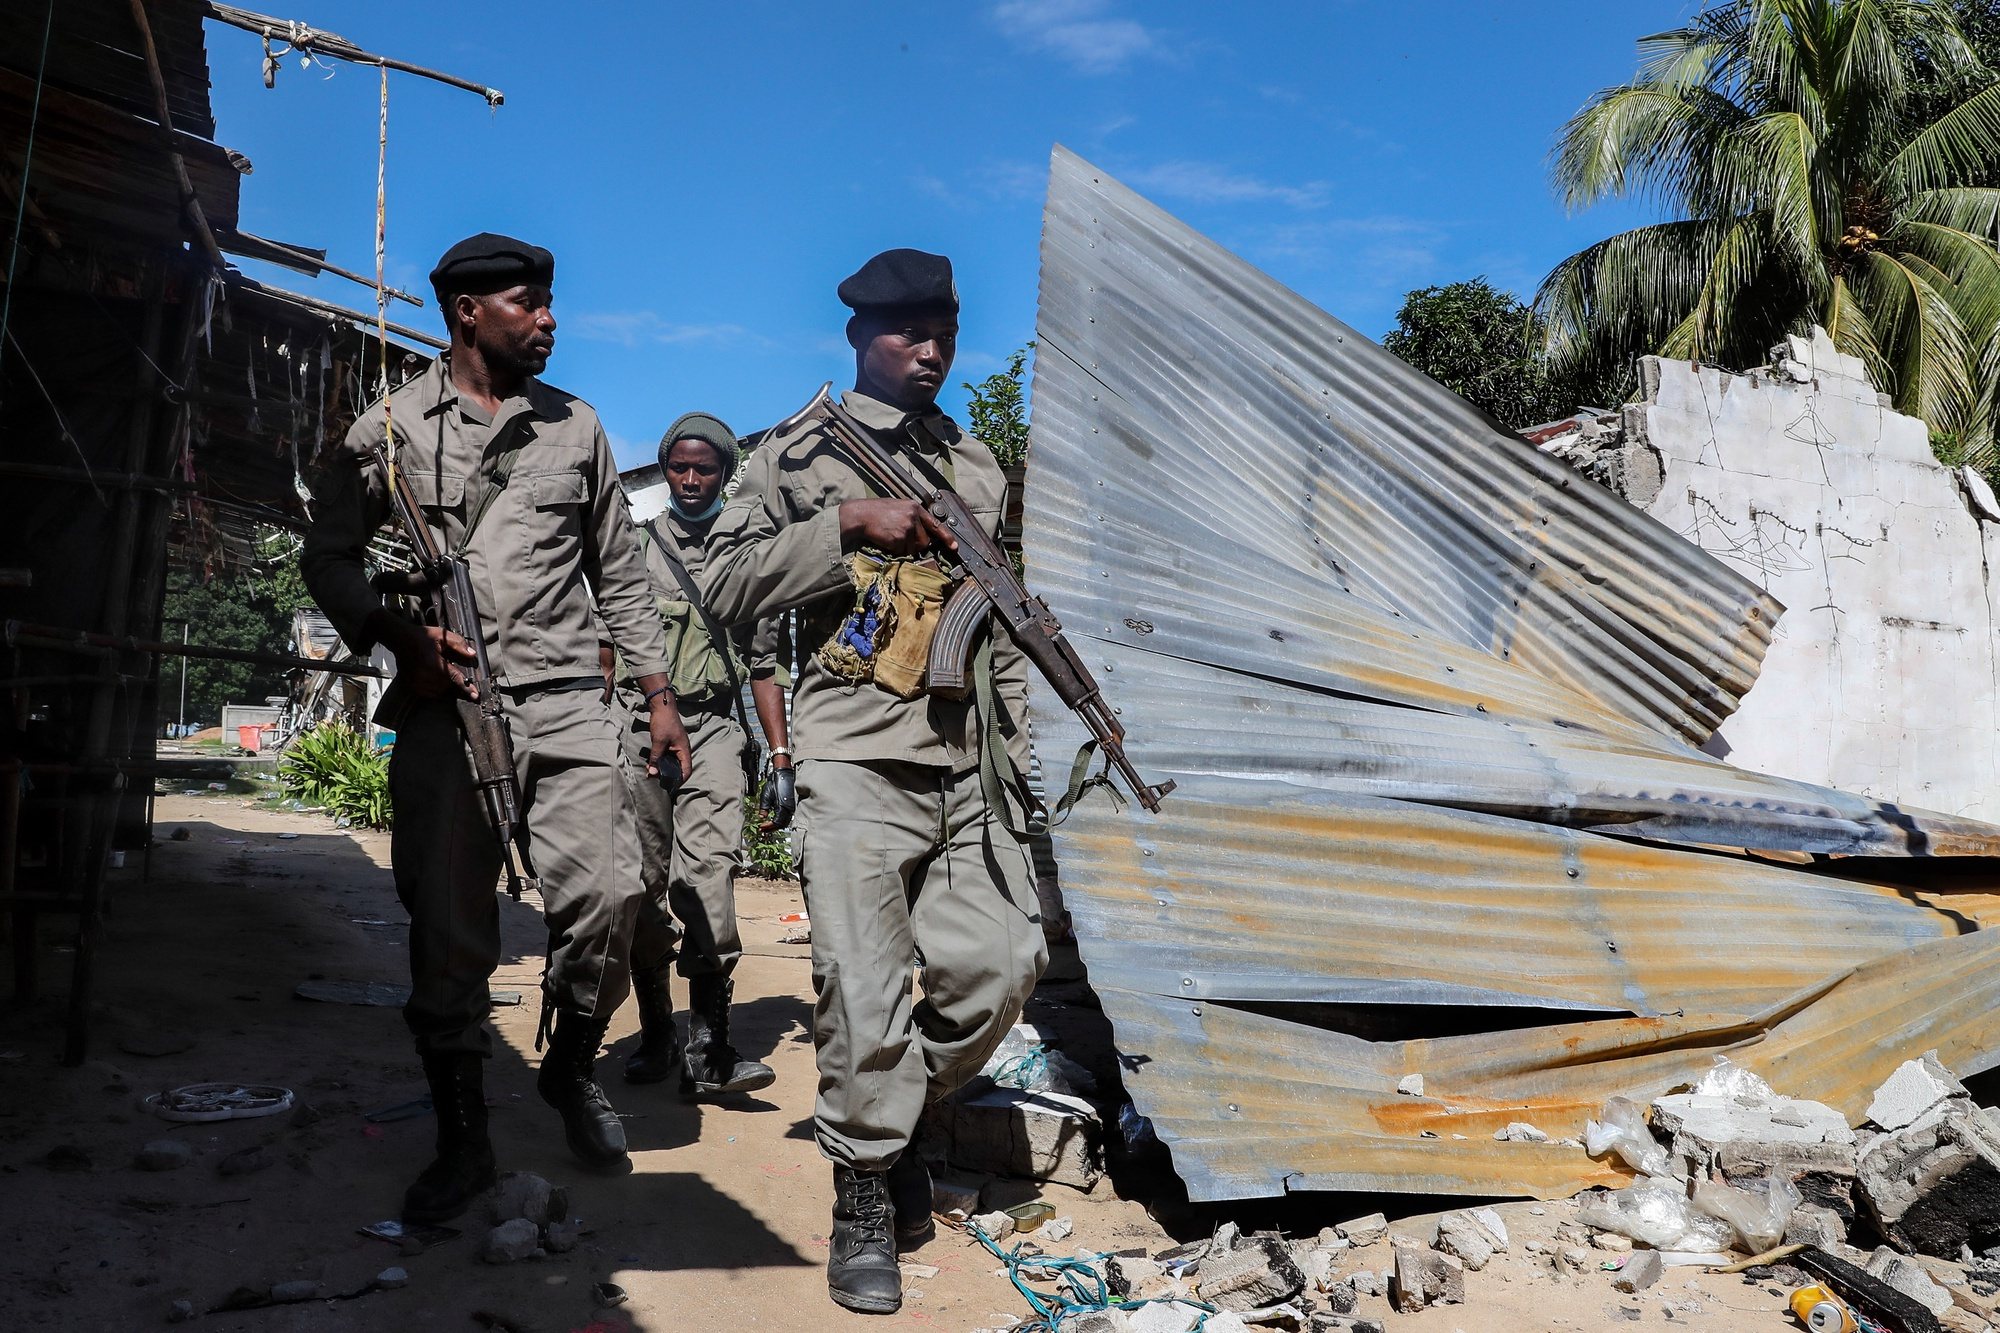 Mozambique army soldiers patrol the destroyed Market of  Palma, Cabo Delgado, Mozambique, 09 April 2021. The violence unleashed more than three years ago in Cabo Delgado province escalated again about two weeks ago, when armed groups first attacked the town of Palma. JOAO RELVAS/LUSA